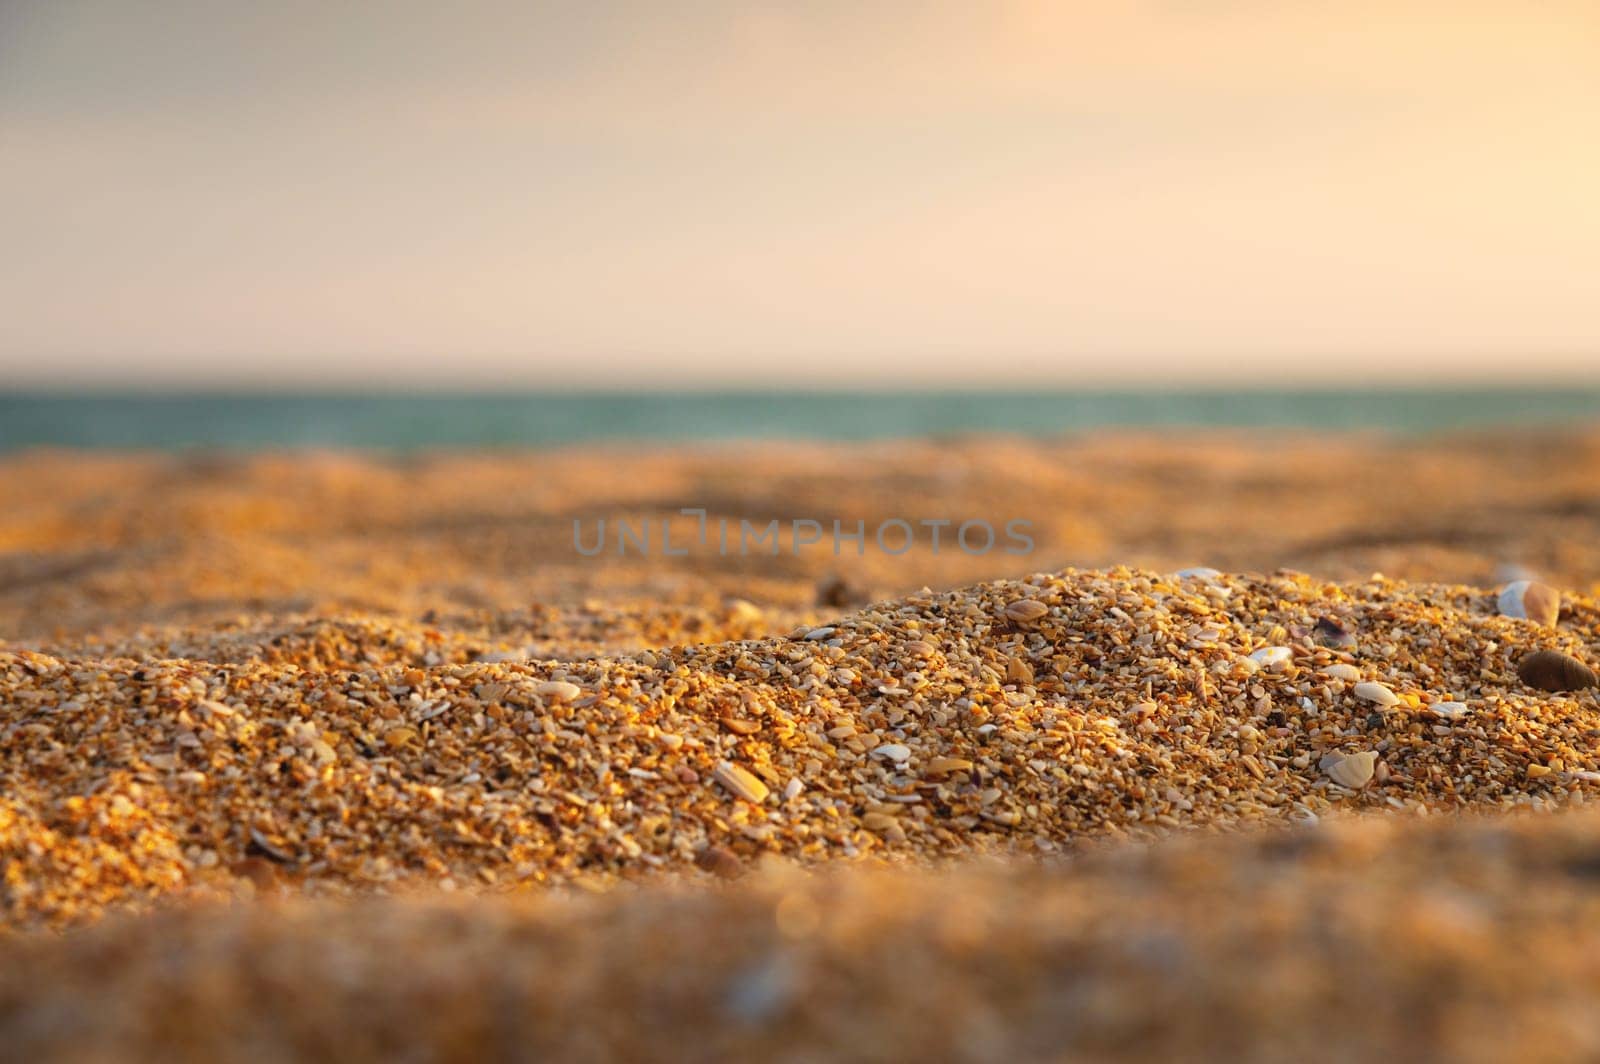 Close-up of shell golden sand in shallow depth of field with sea or ocean in the background at sunset. Marine background in warm colors.